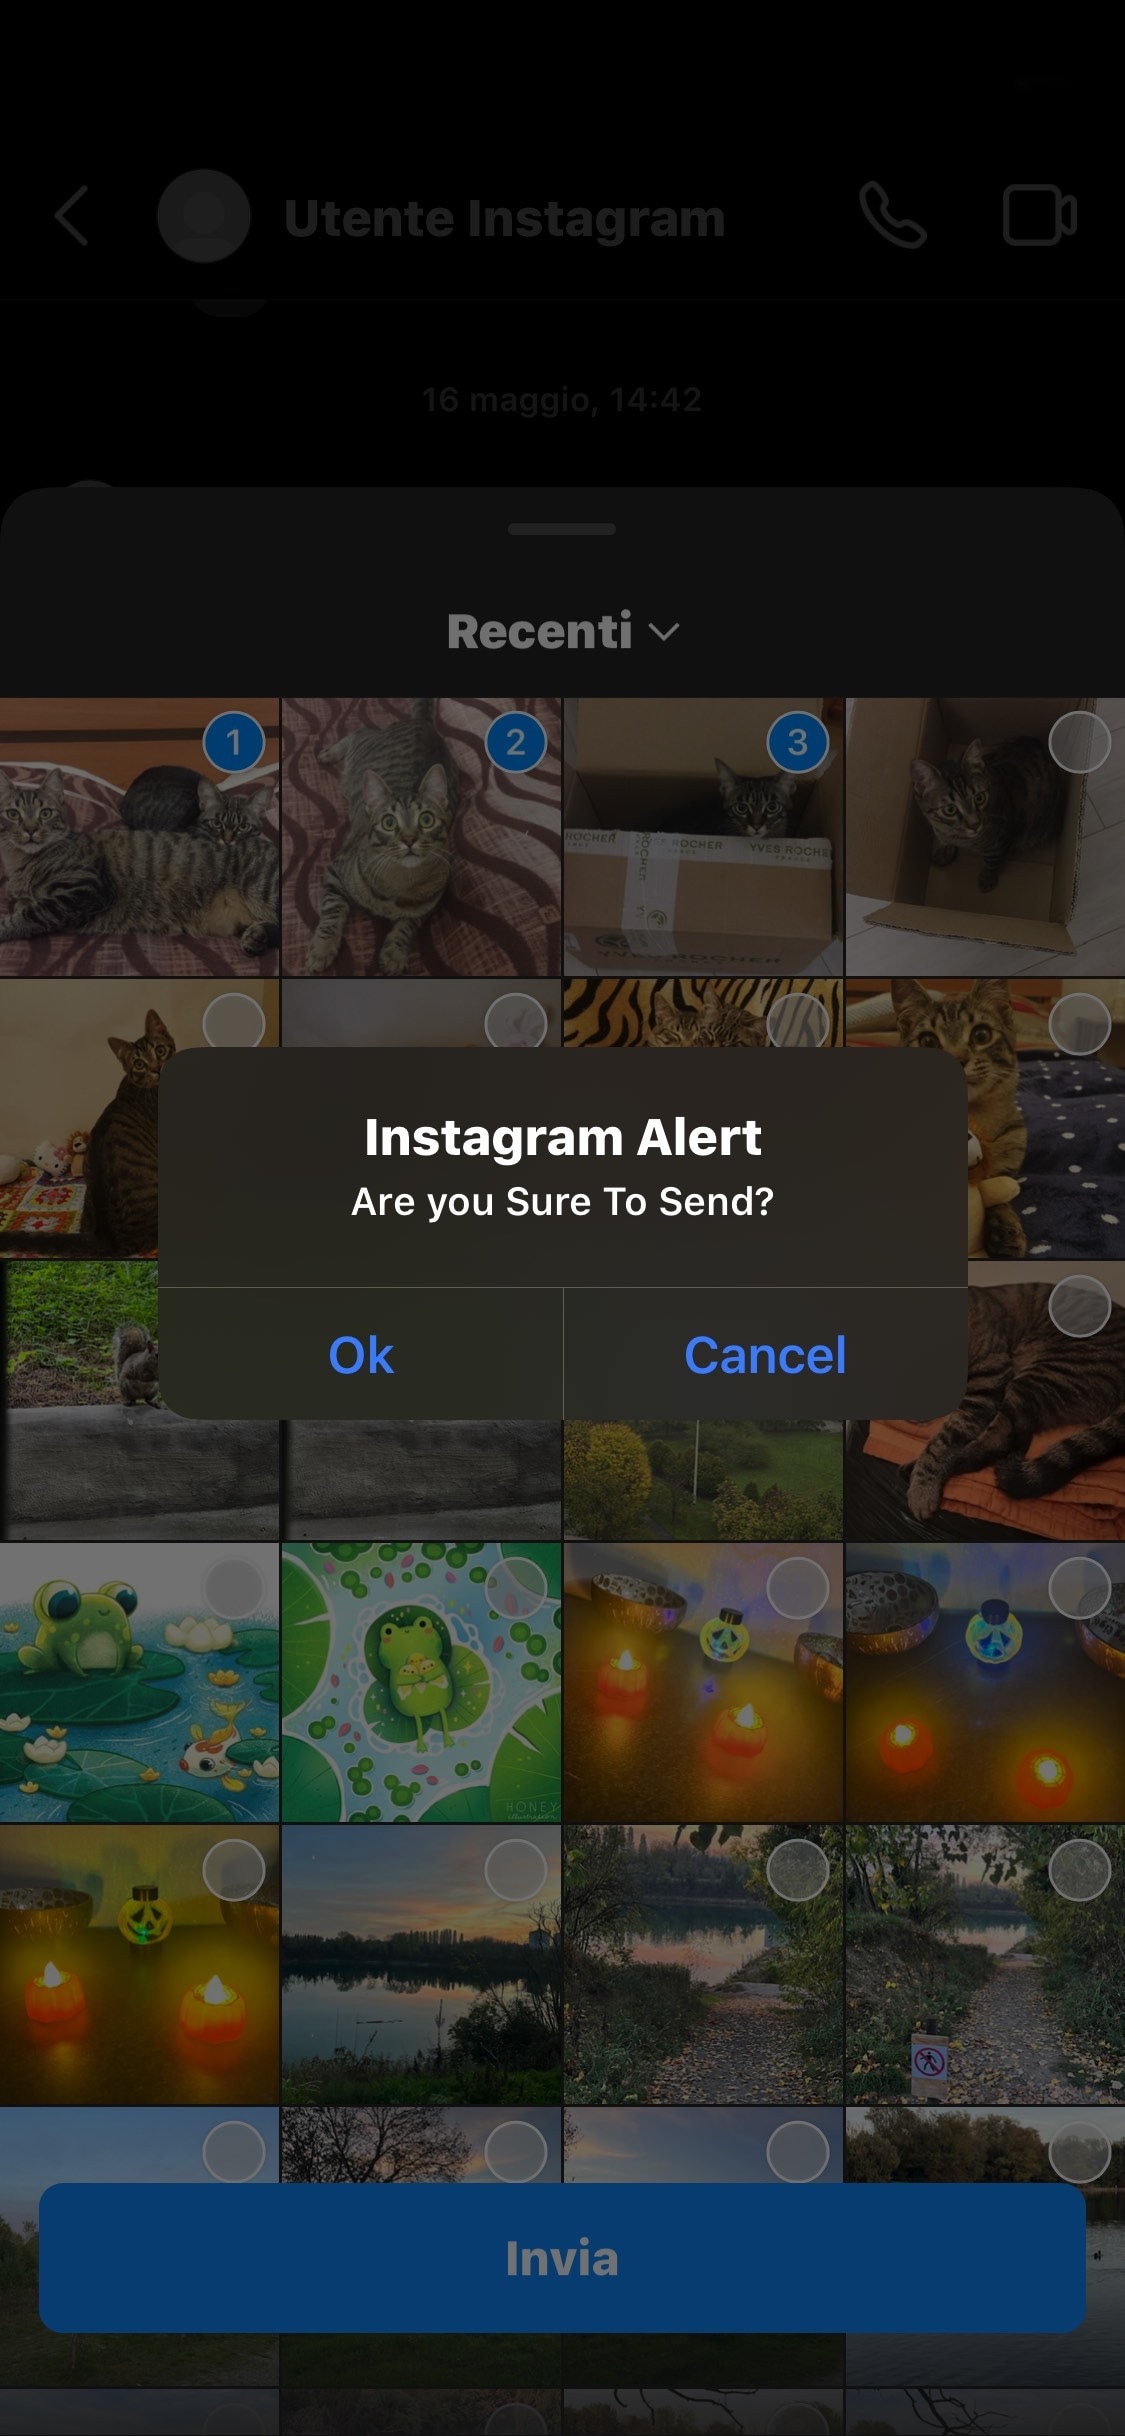 IGTidyMediaSend makes you confirm before uploading media to Instagram.